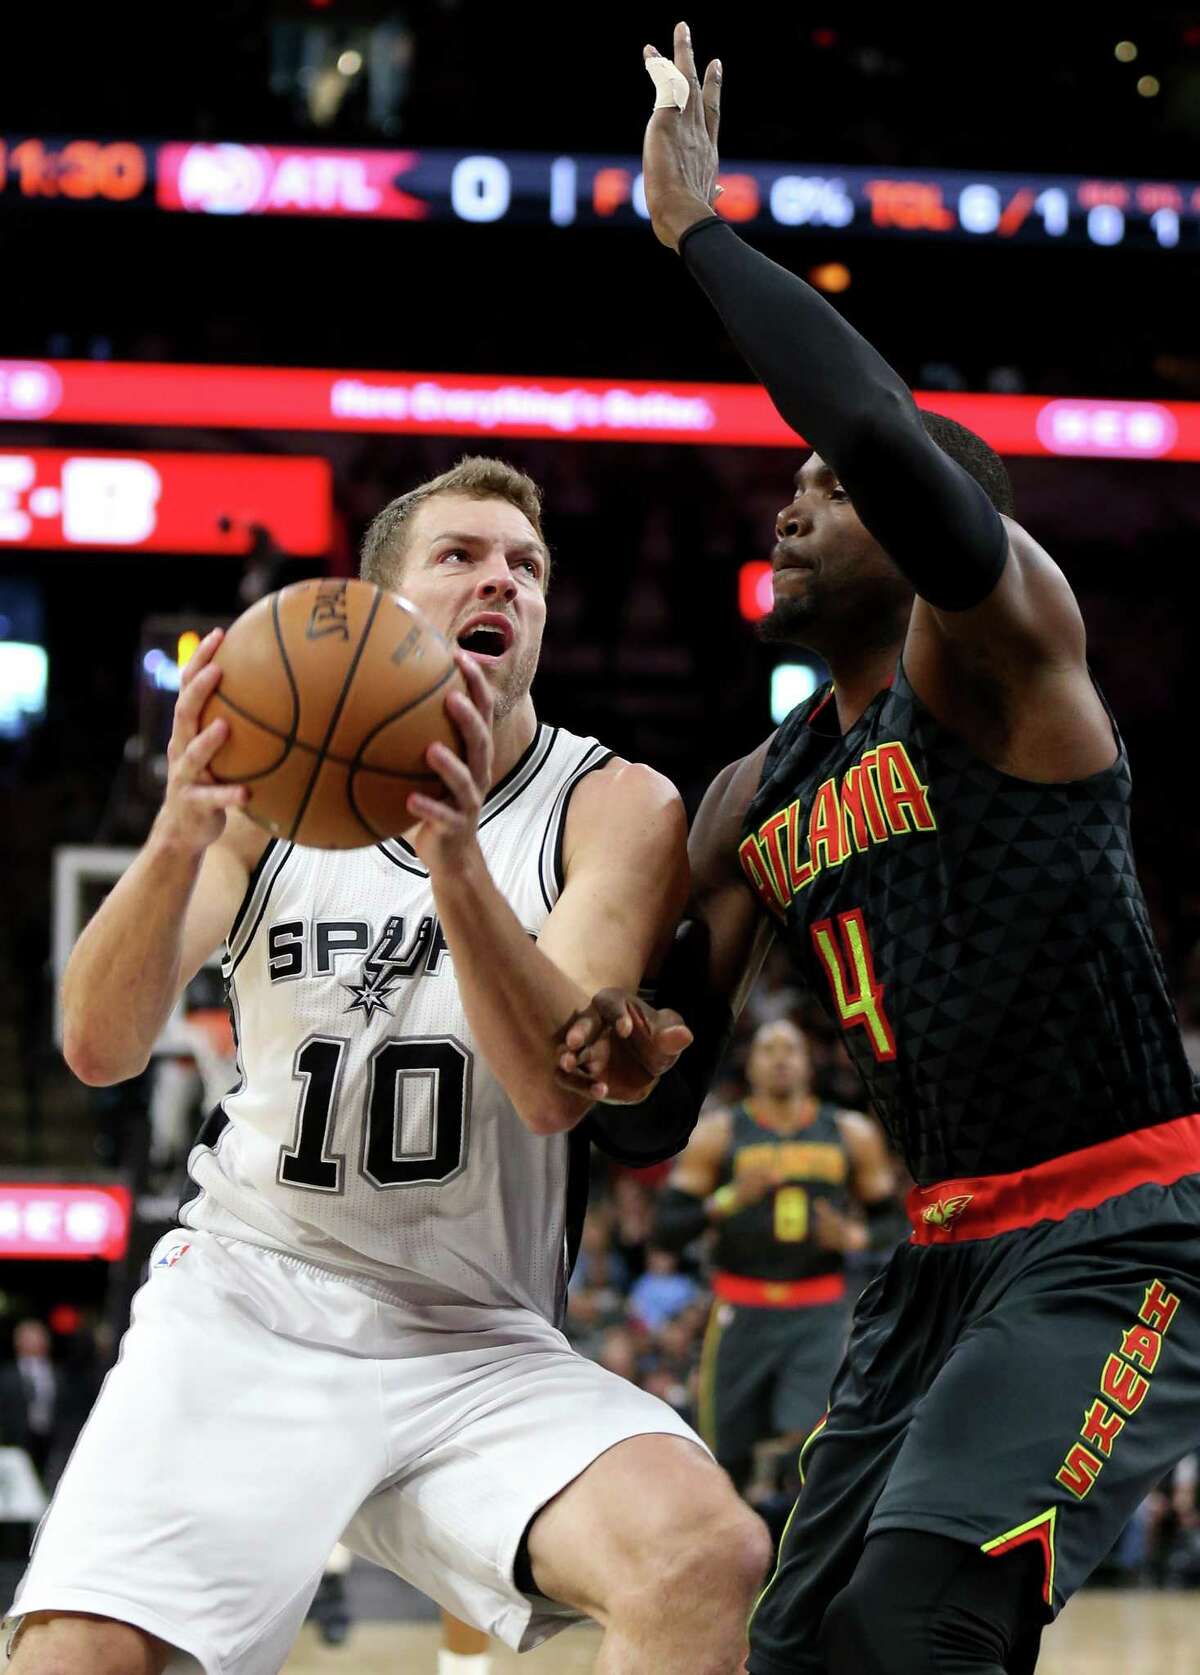 Spurs’ David Lee looks for room inside around the Atlanta Hawks’ Paul Millsap during first half action on March 13, 2017 at the AT&T Center.